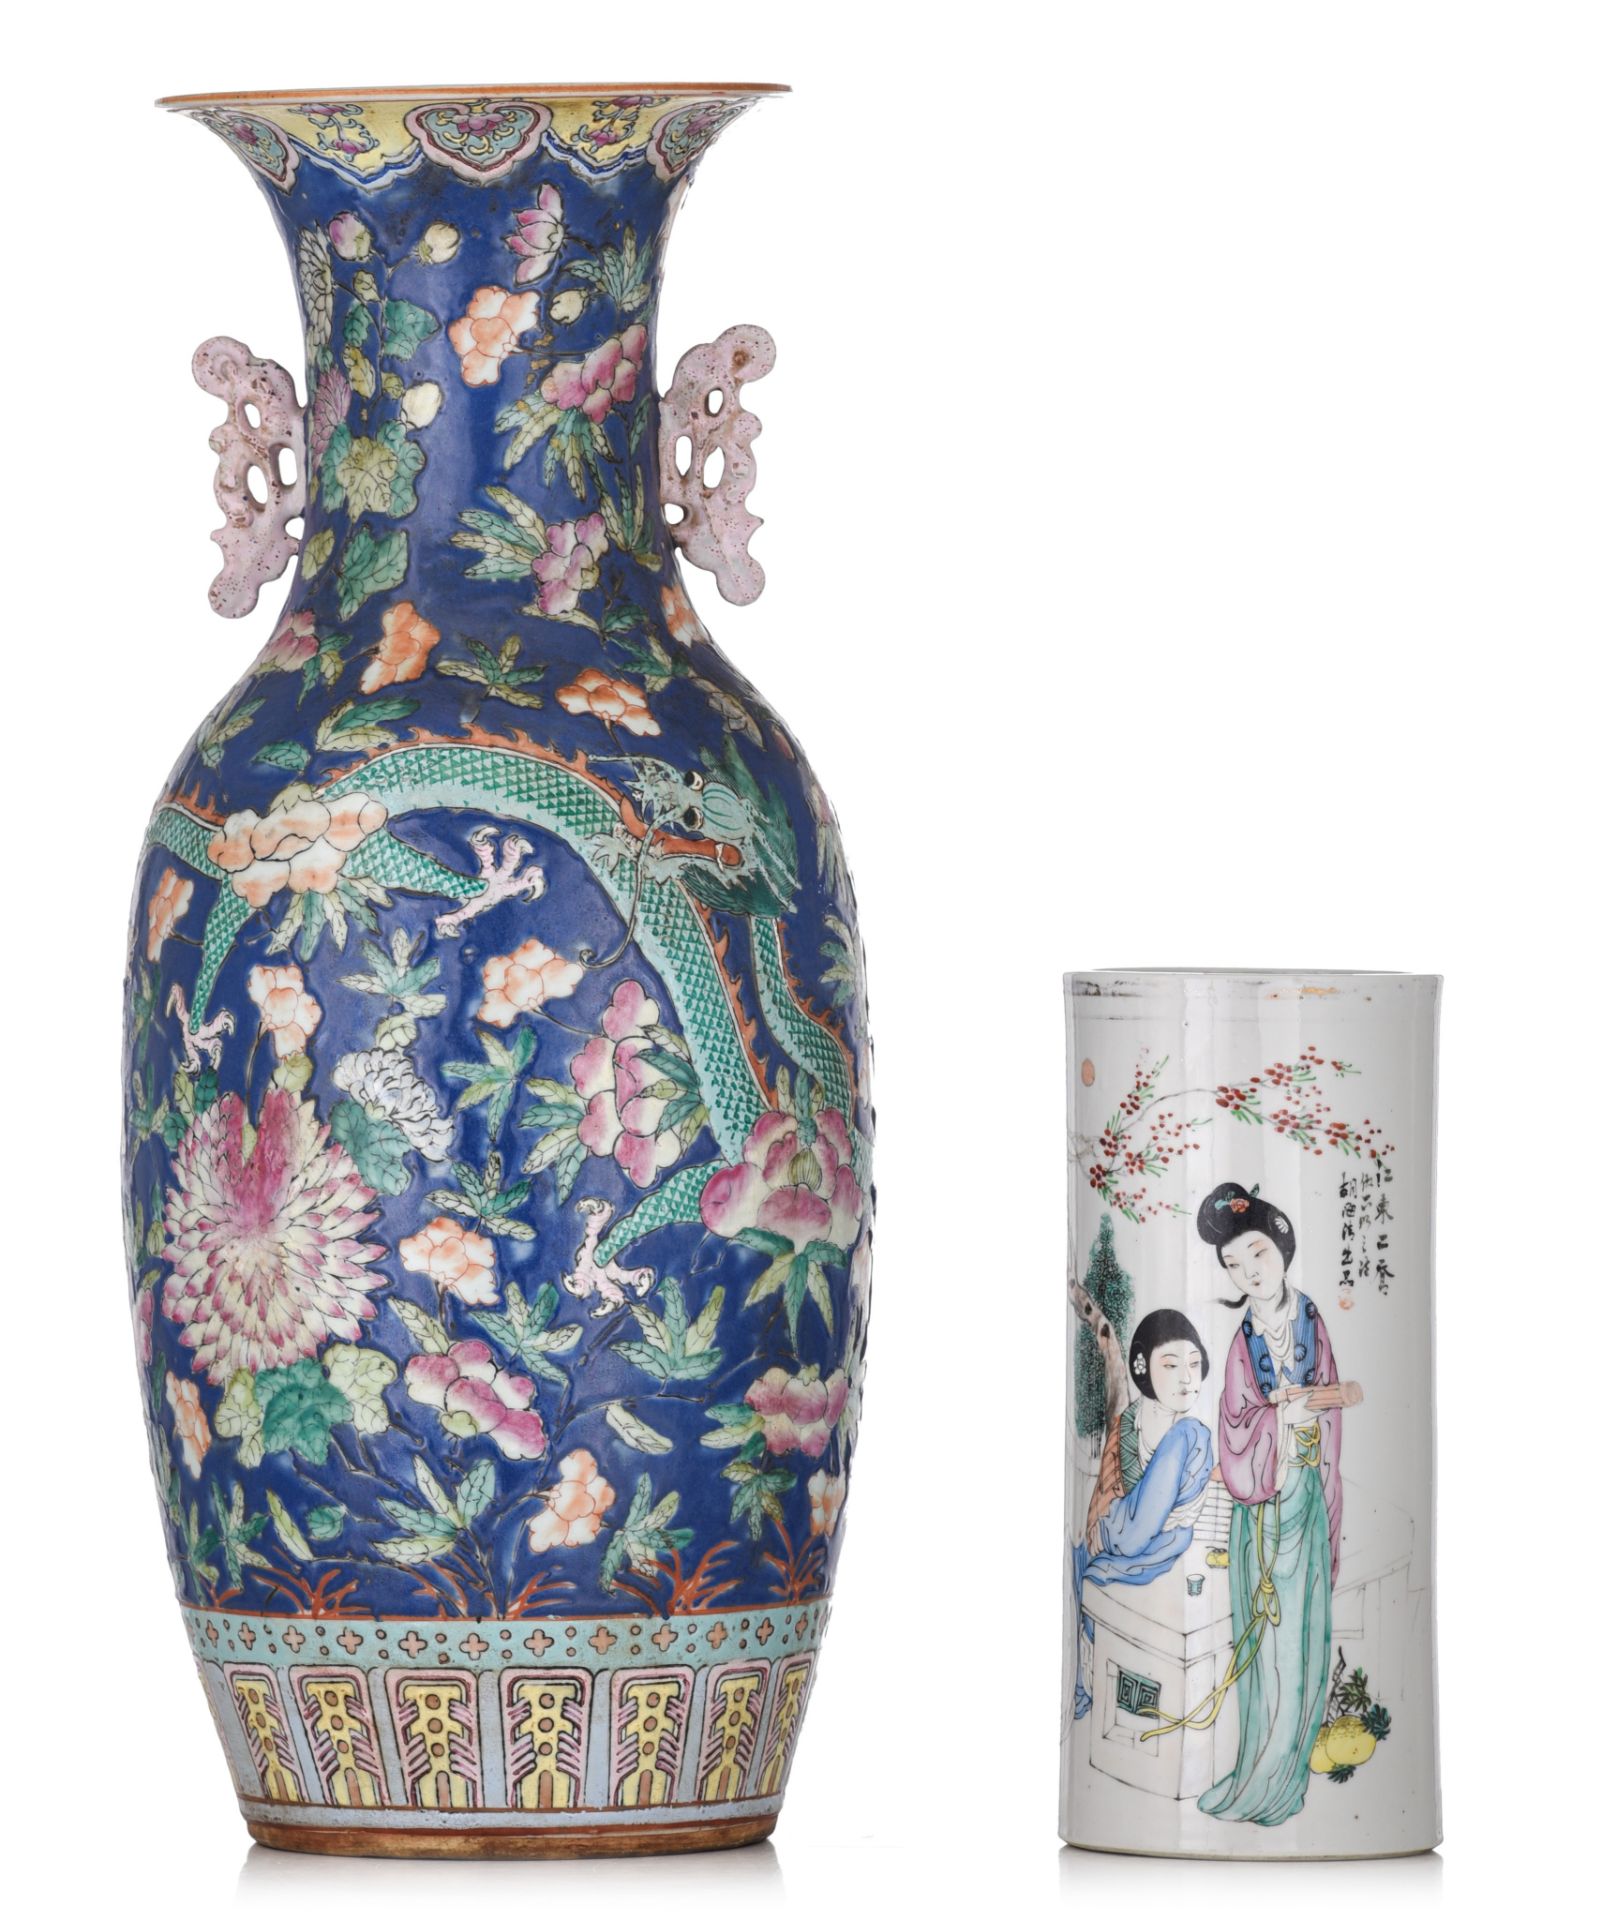 A Chinese famille rose vase, 19thC, H 57 cm - and a famille rose cylindrical vase, with a signed tex